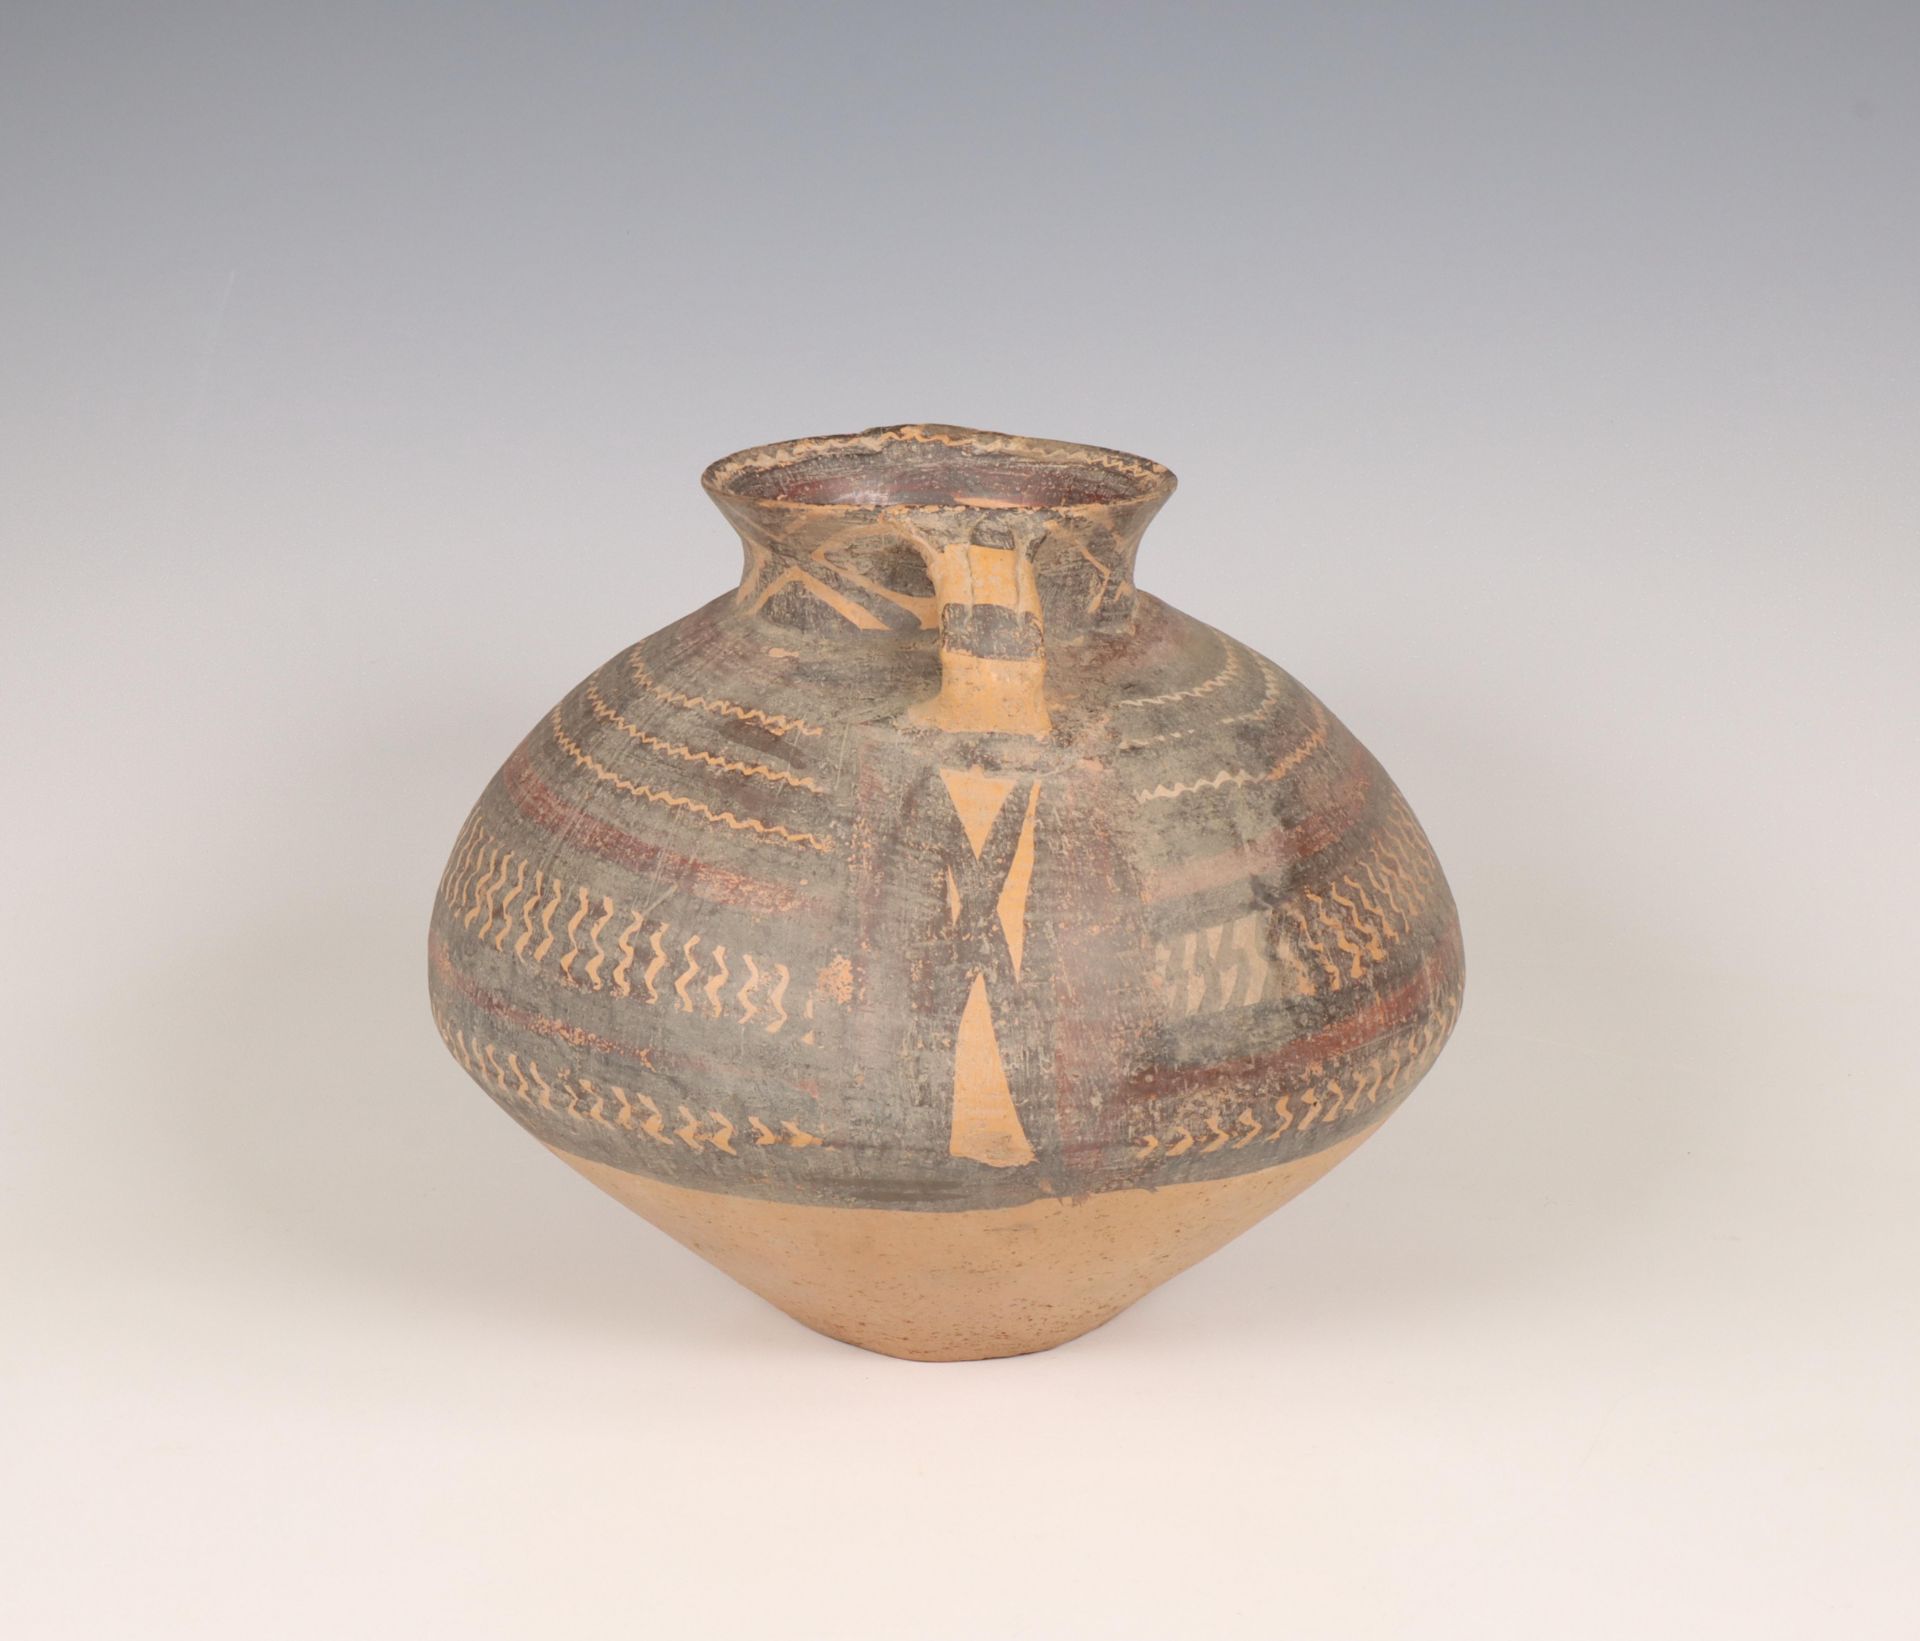 China, earthenware pot, Majiayao culture, Machang phase, late 3rd millennium BC, - Image 6 of 6